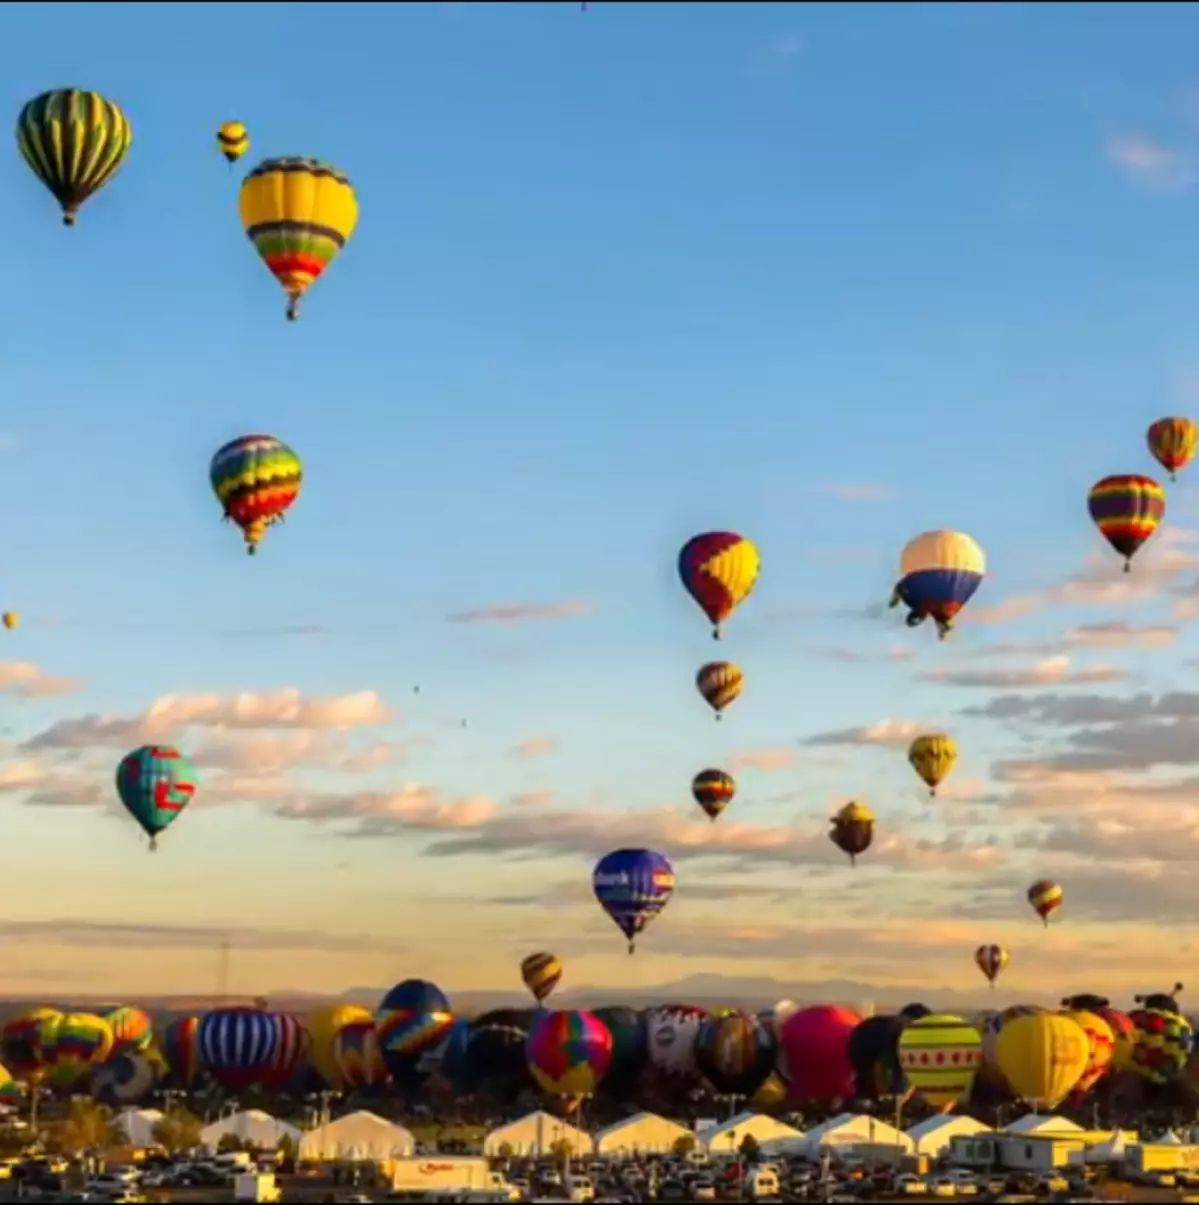 Watch This Beautiful Time Lapse Hot Air Balloon Launch [VIDEO]